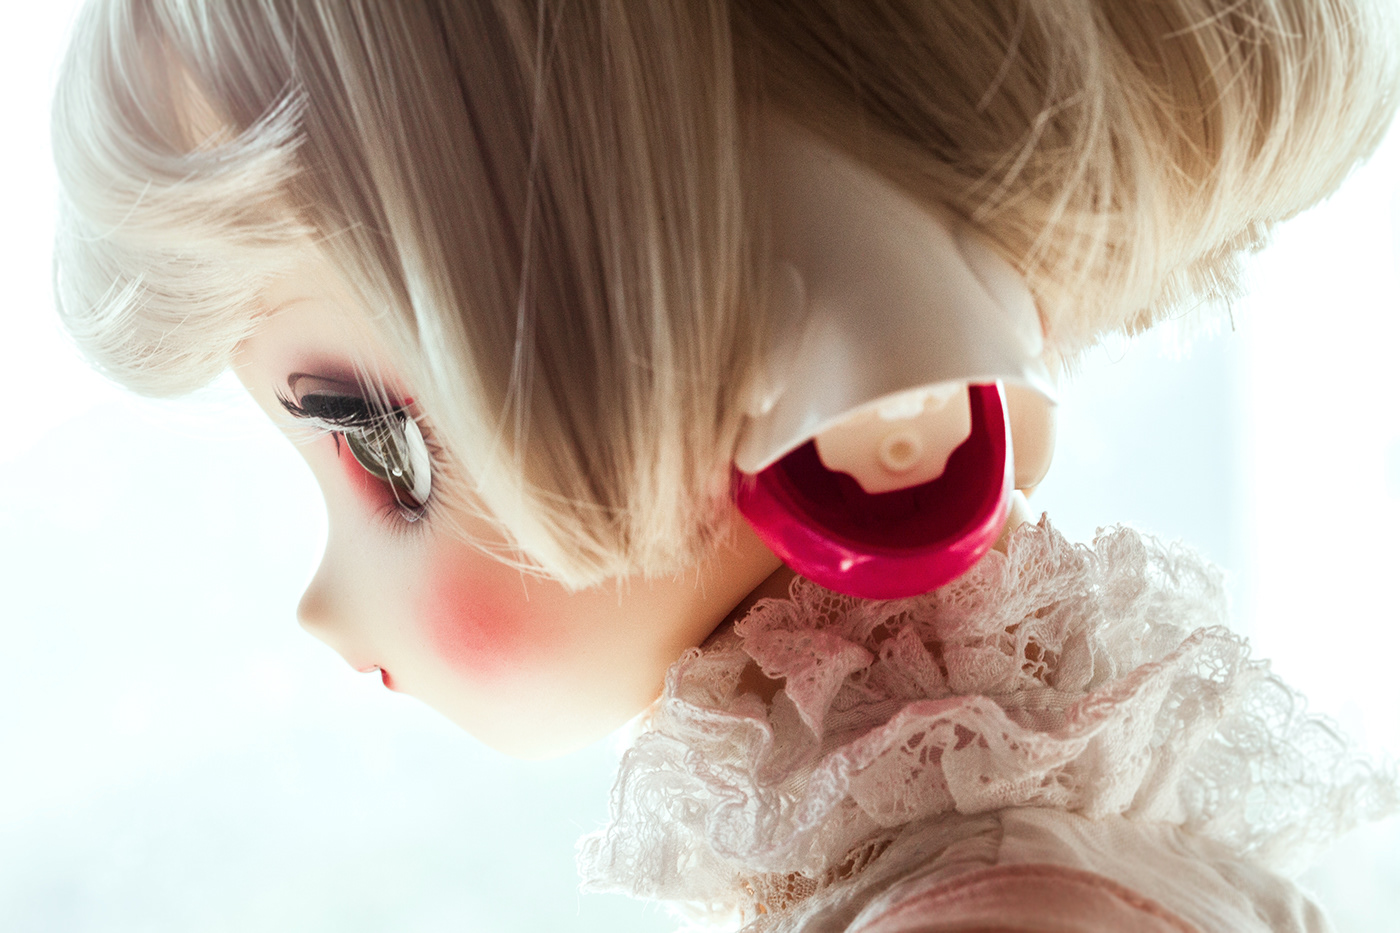 doll doll art Doll Photography toy styling  Photography  portrait